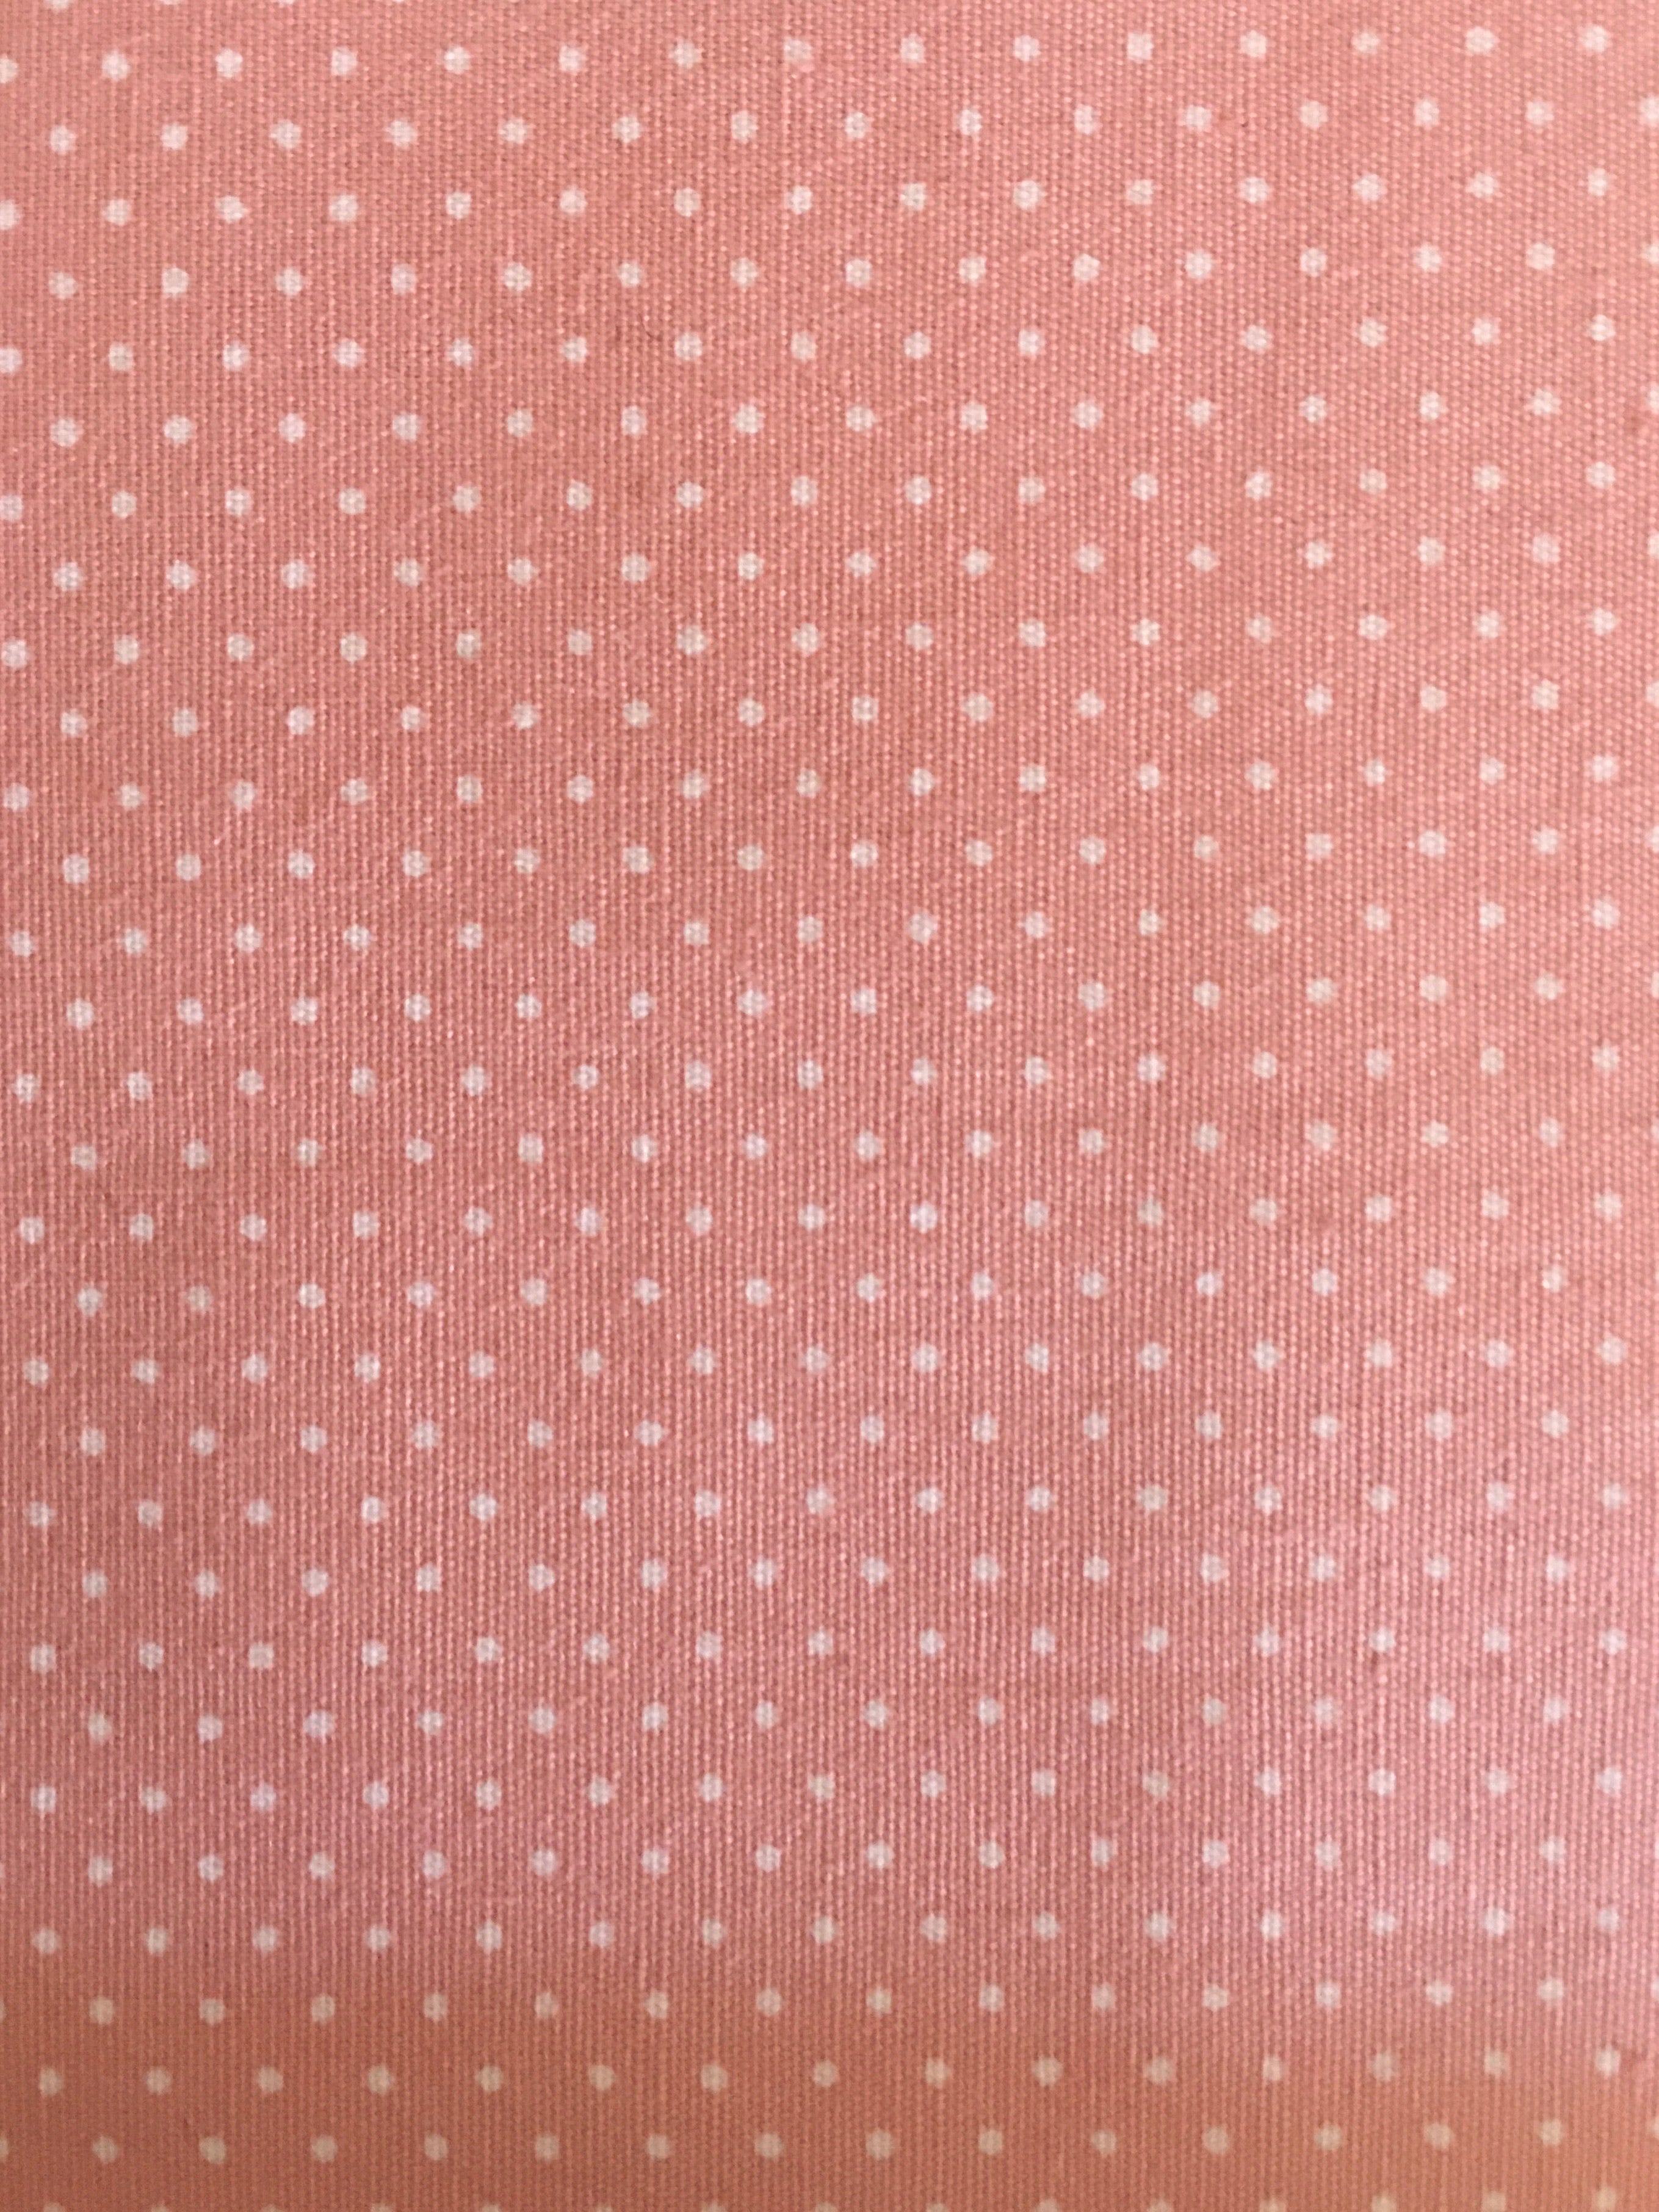 Sevenberry White Micro Dot on Dusty Pink